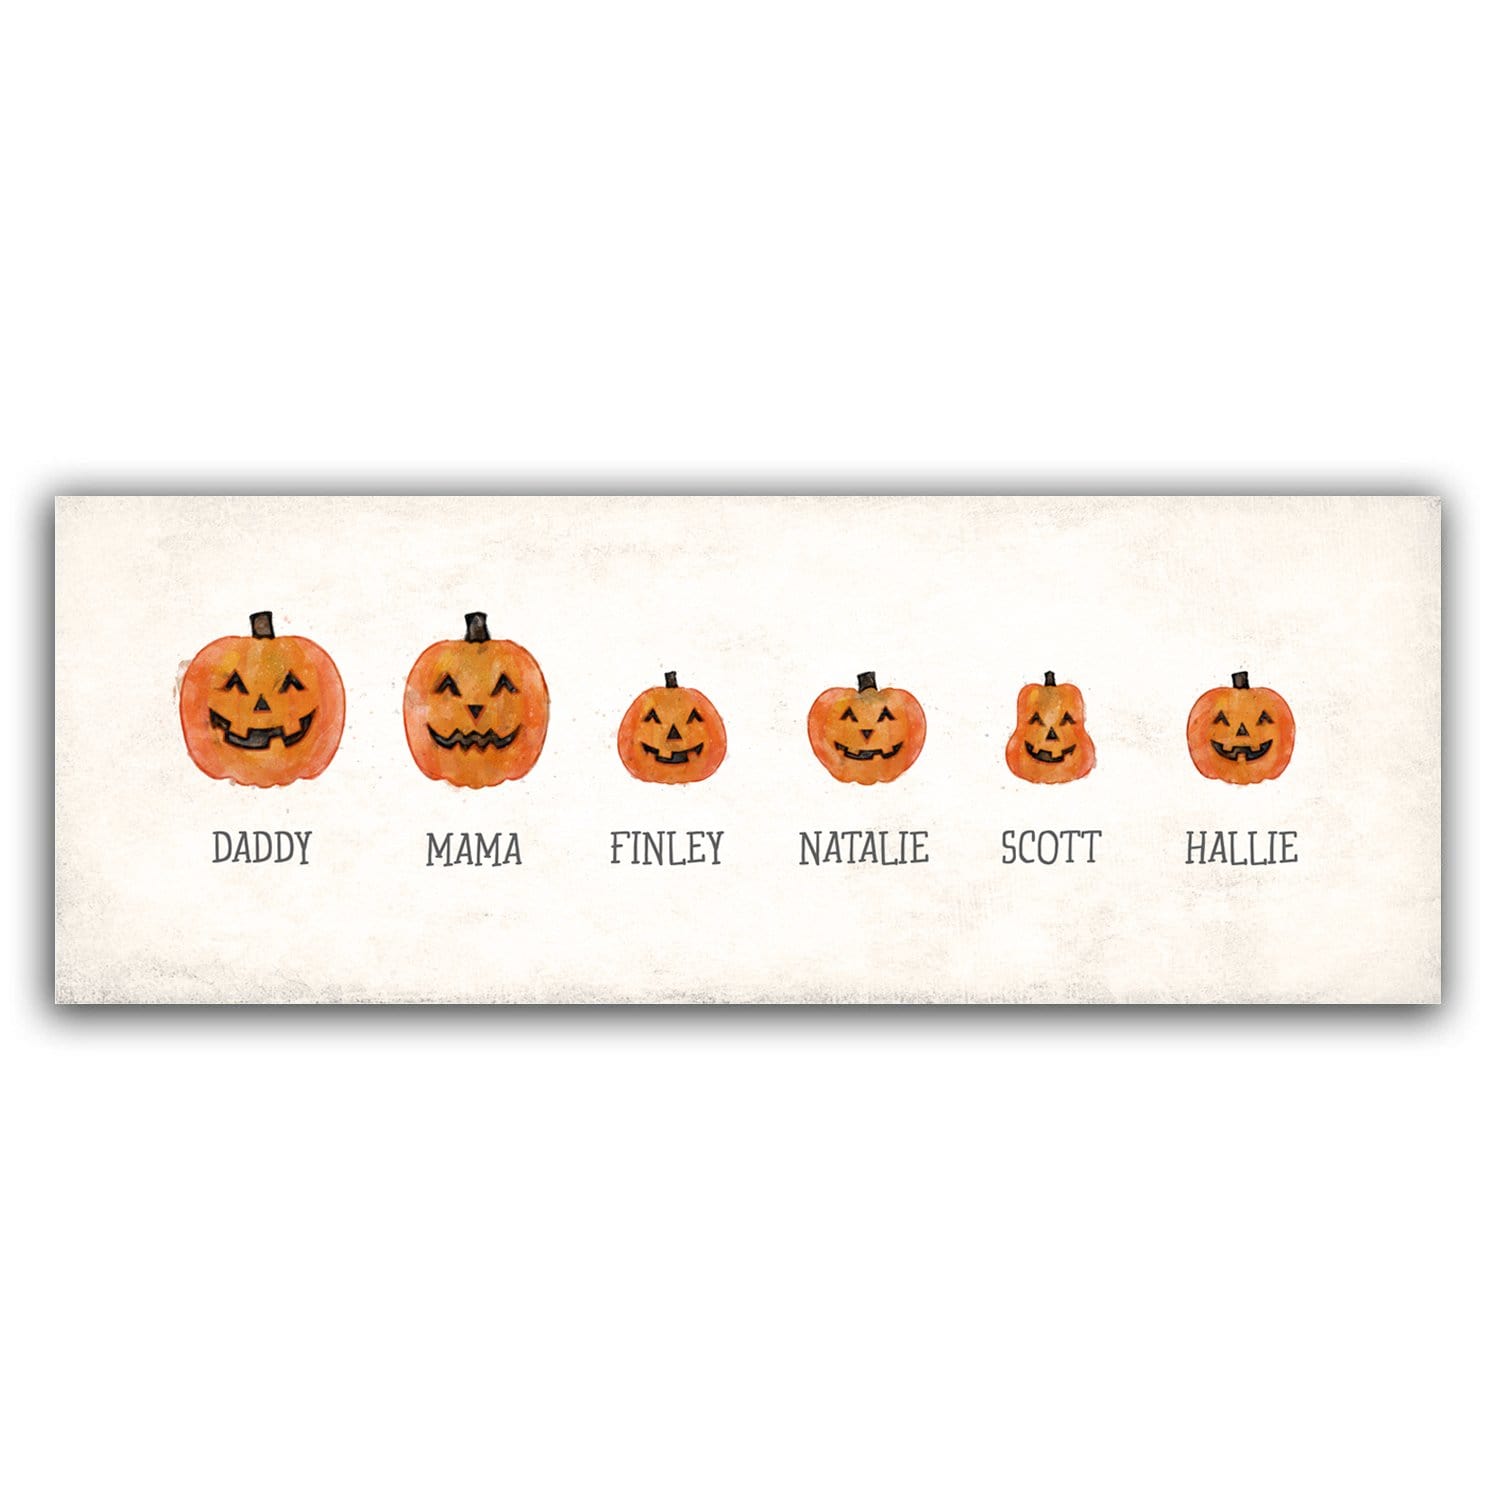 Personalized Halloween Gifts and Decor from Personal Prints - Jack-O-Lantern Family art